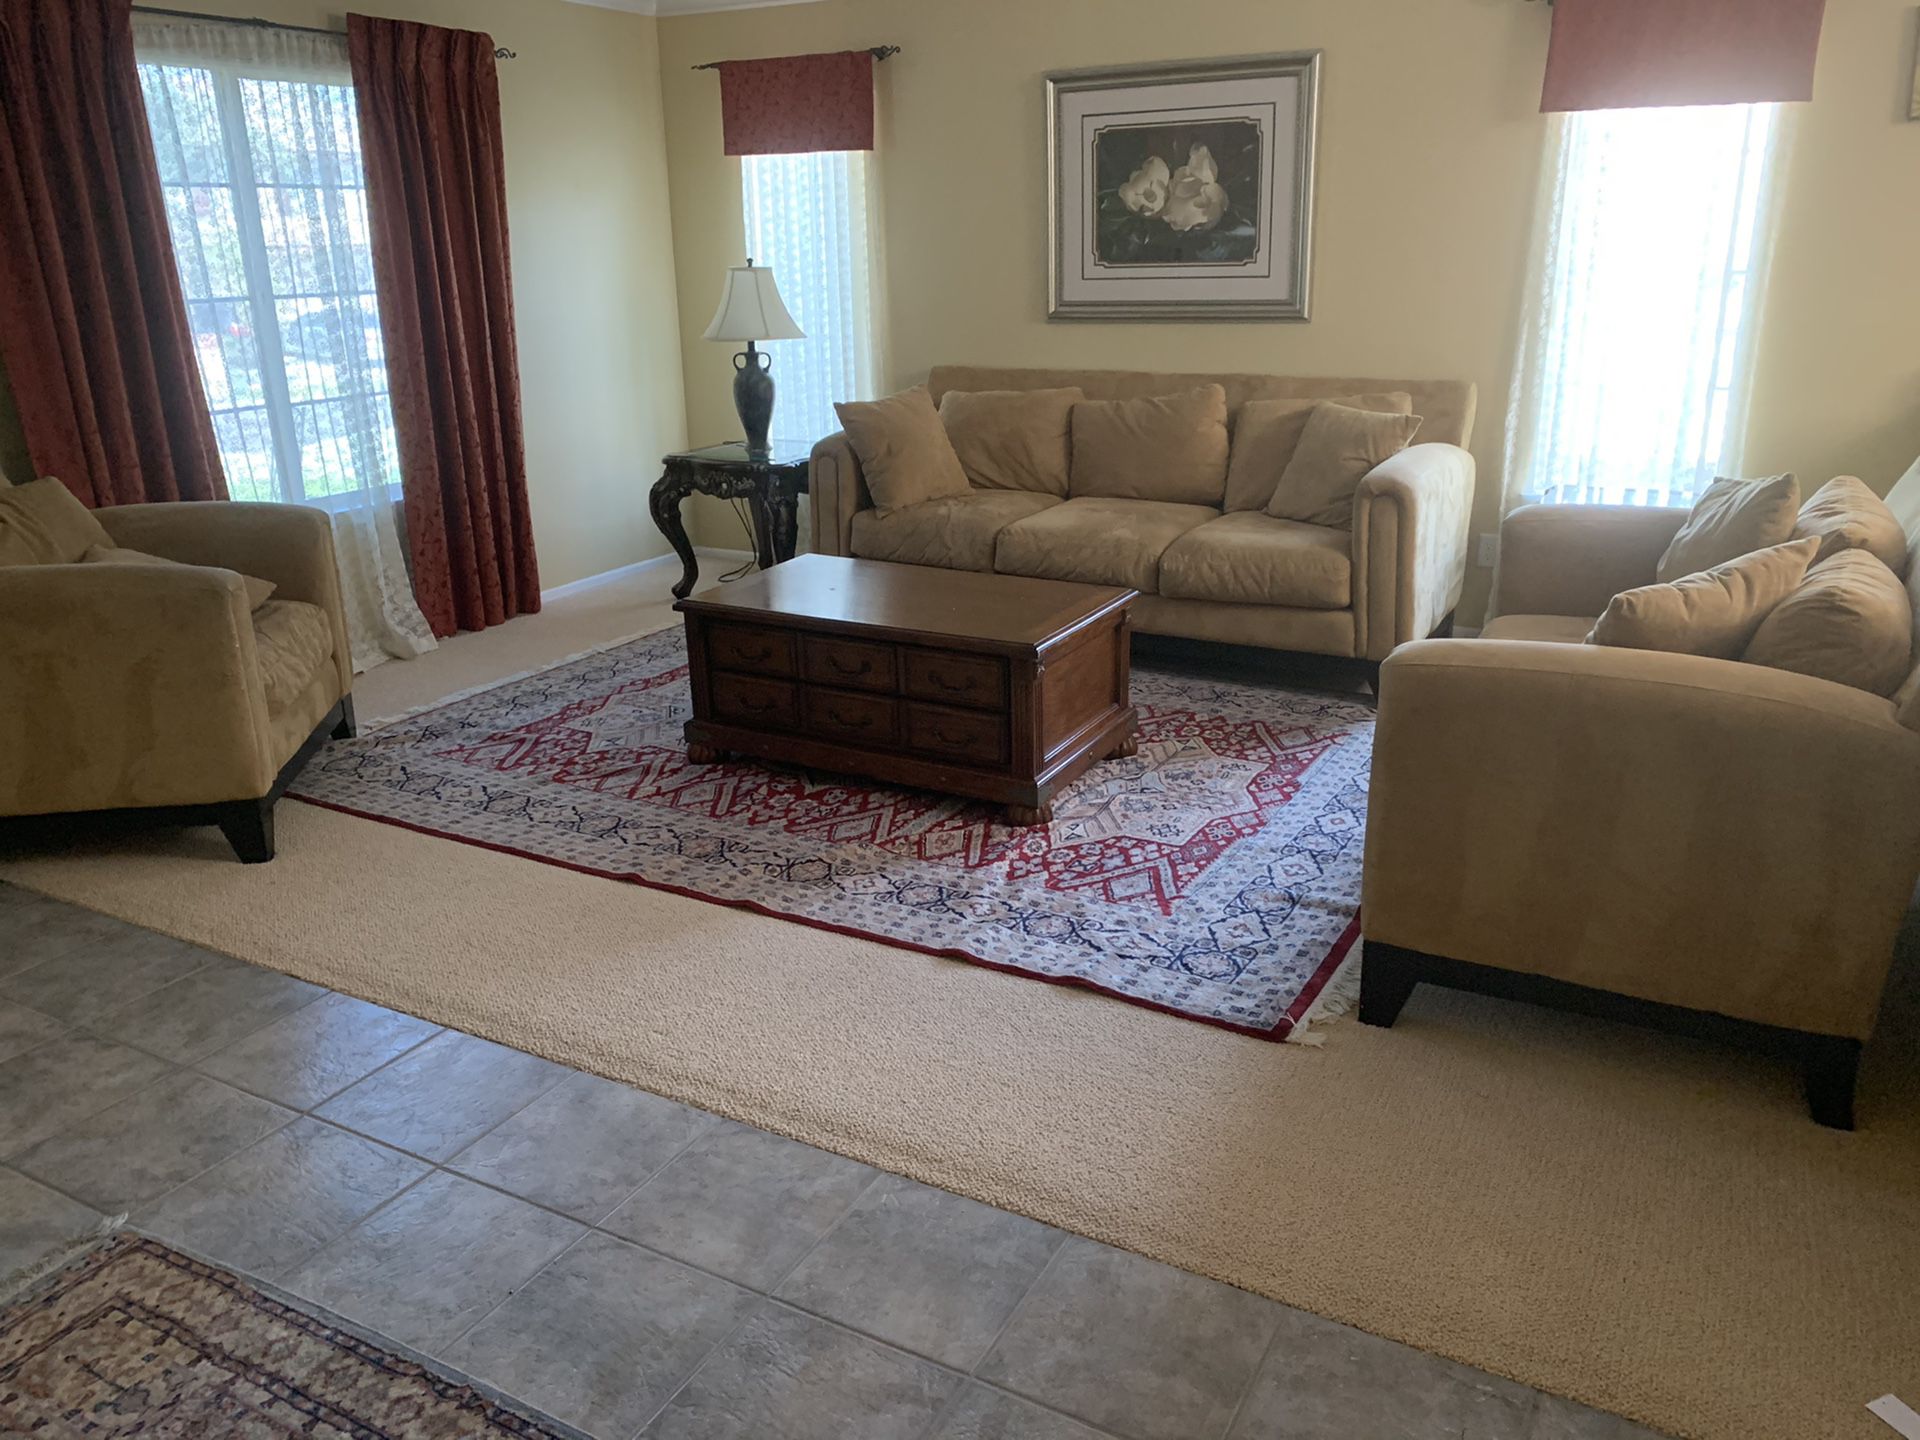 3 Piece set (Couch, love seat, chair)